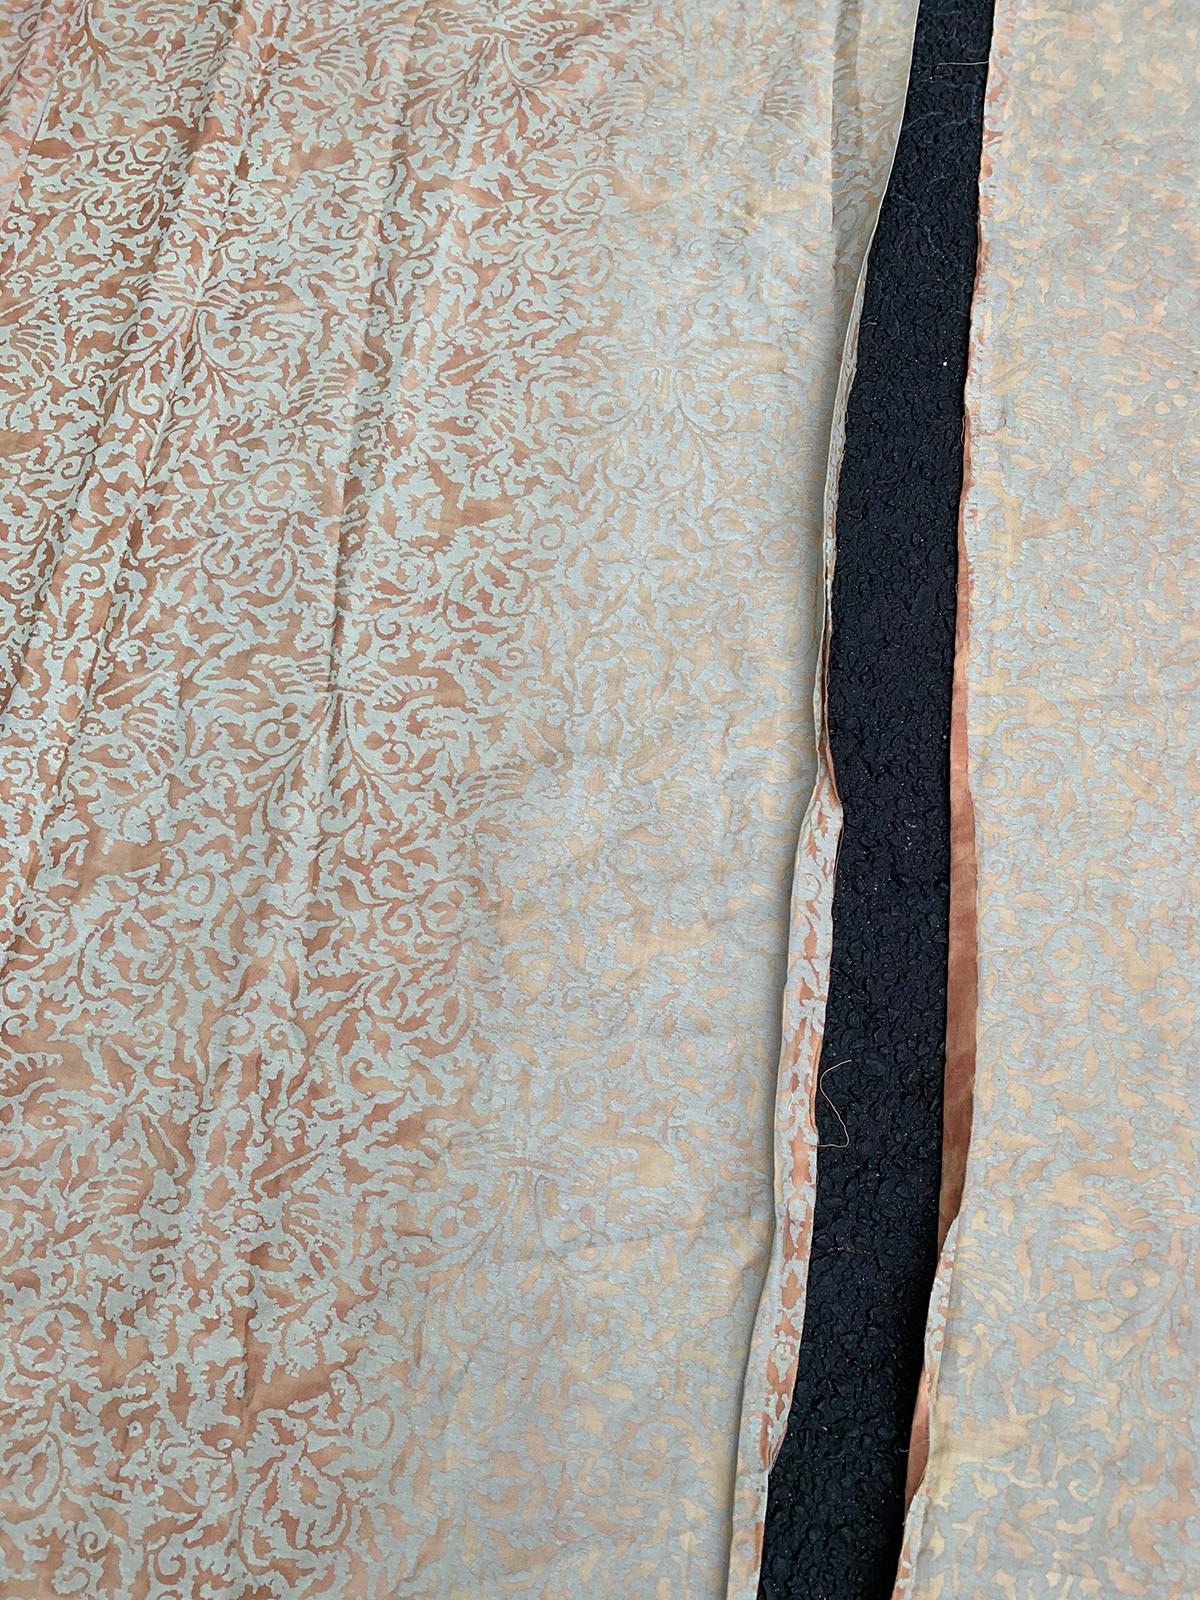 Pair of Mid-20th Century Fortuny Fabric Panels with Custom Seaming 10